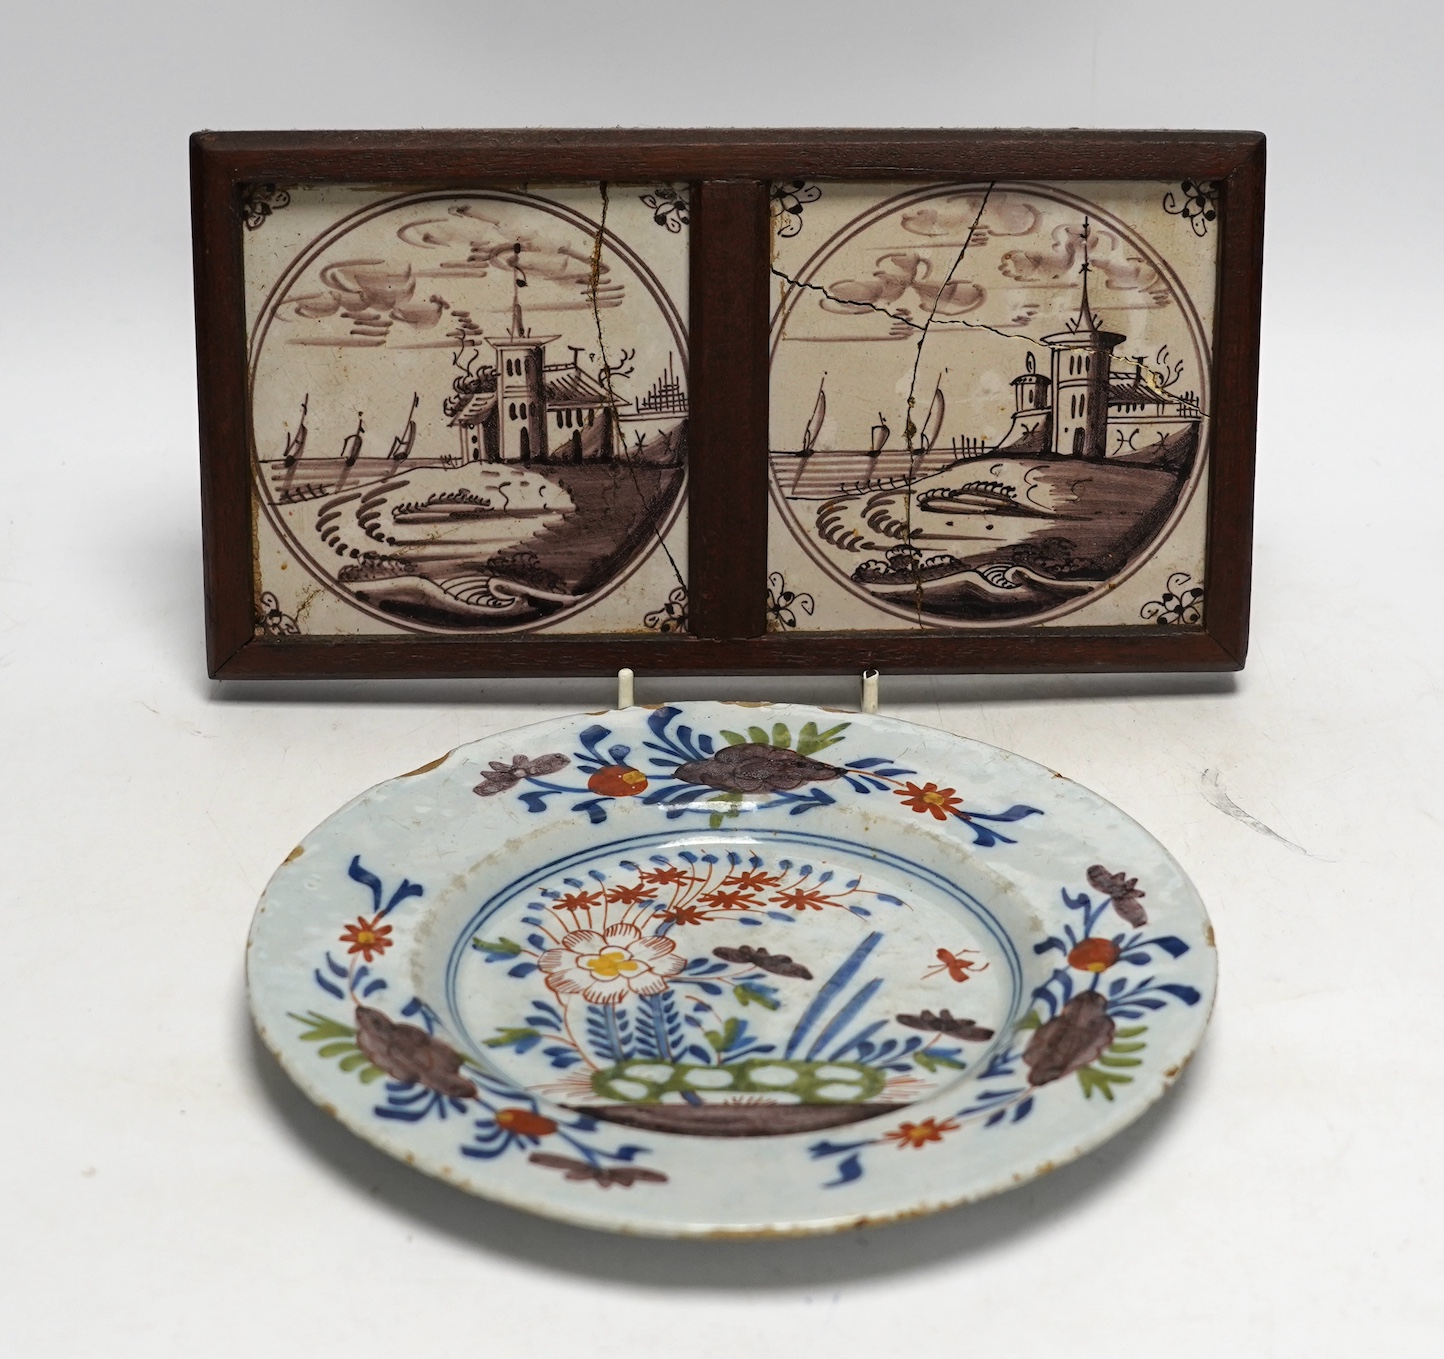 An 18th century Delft polychrome plate, 23cm diameter and two framed tiles